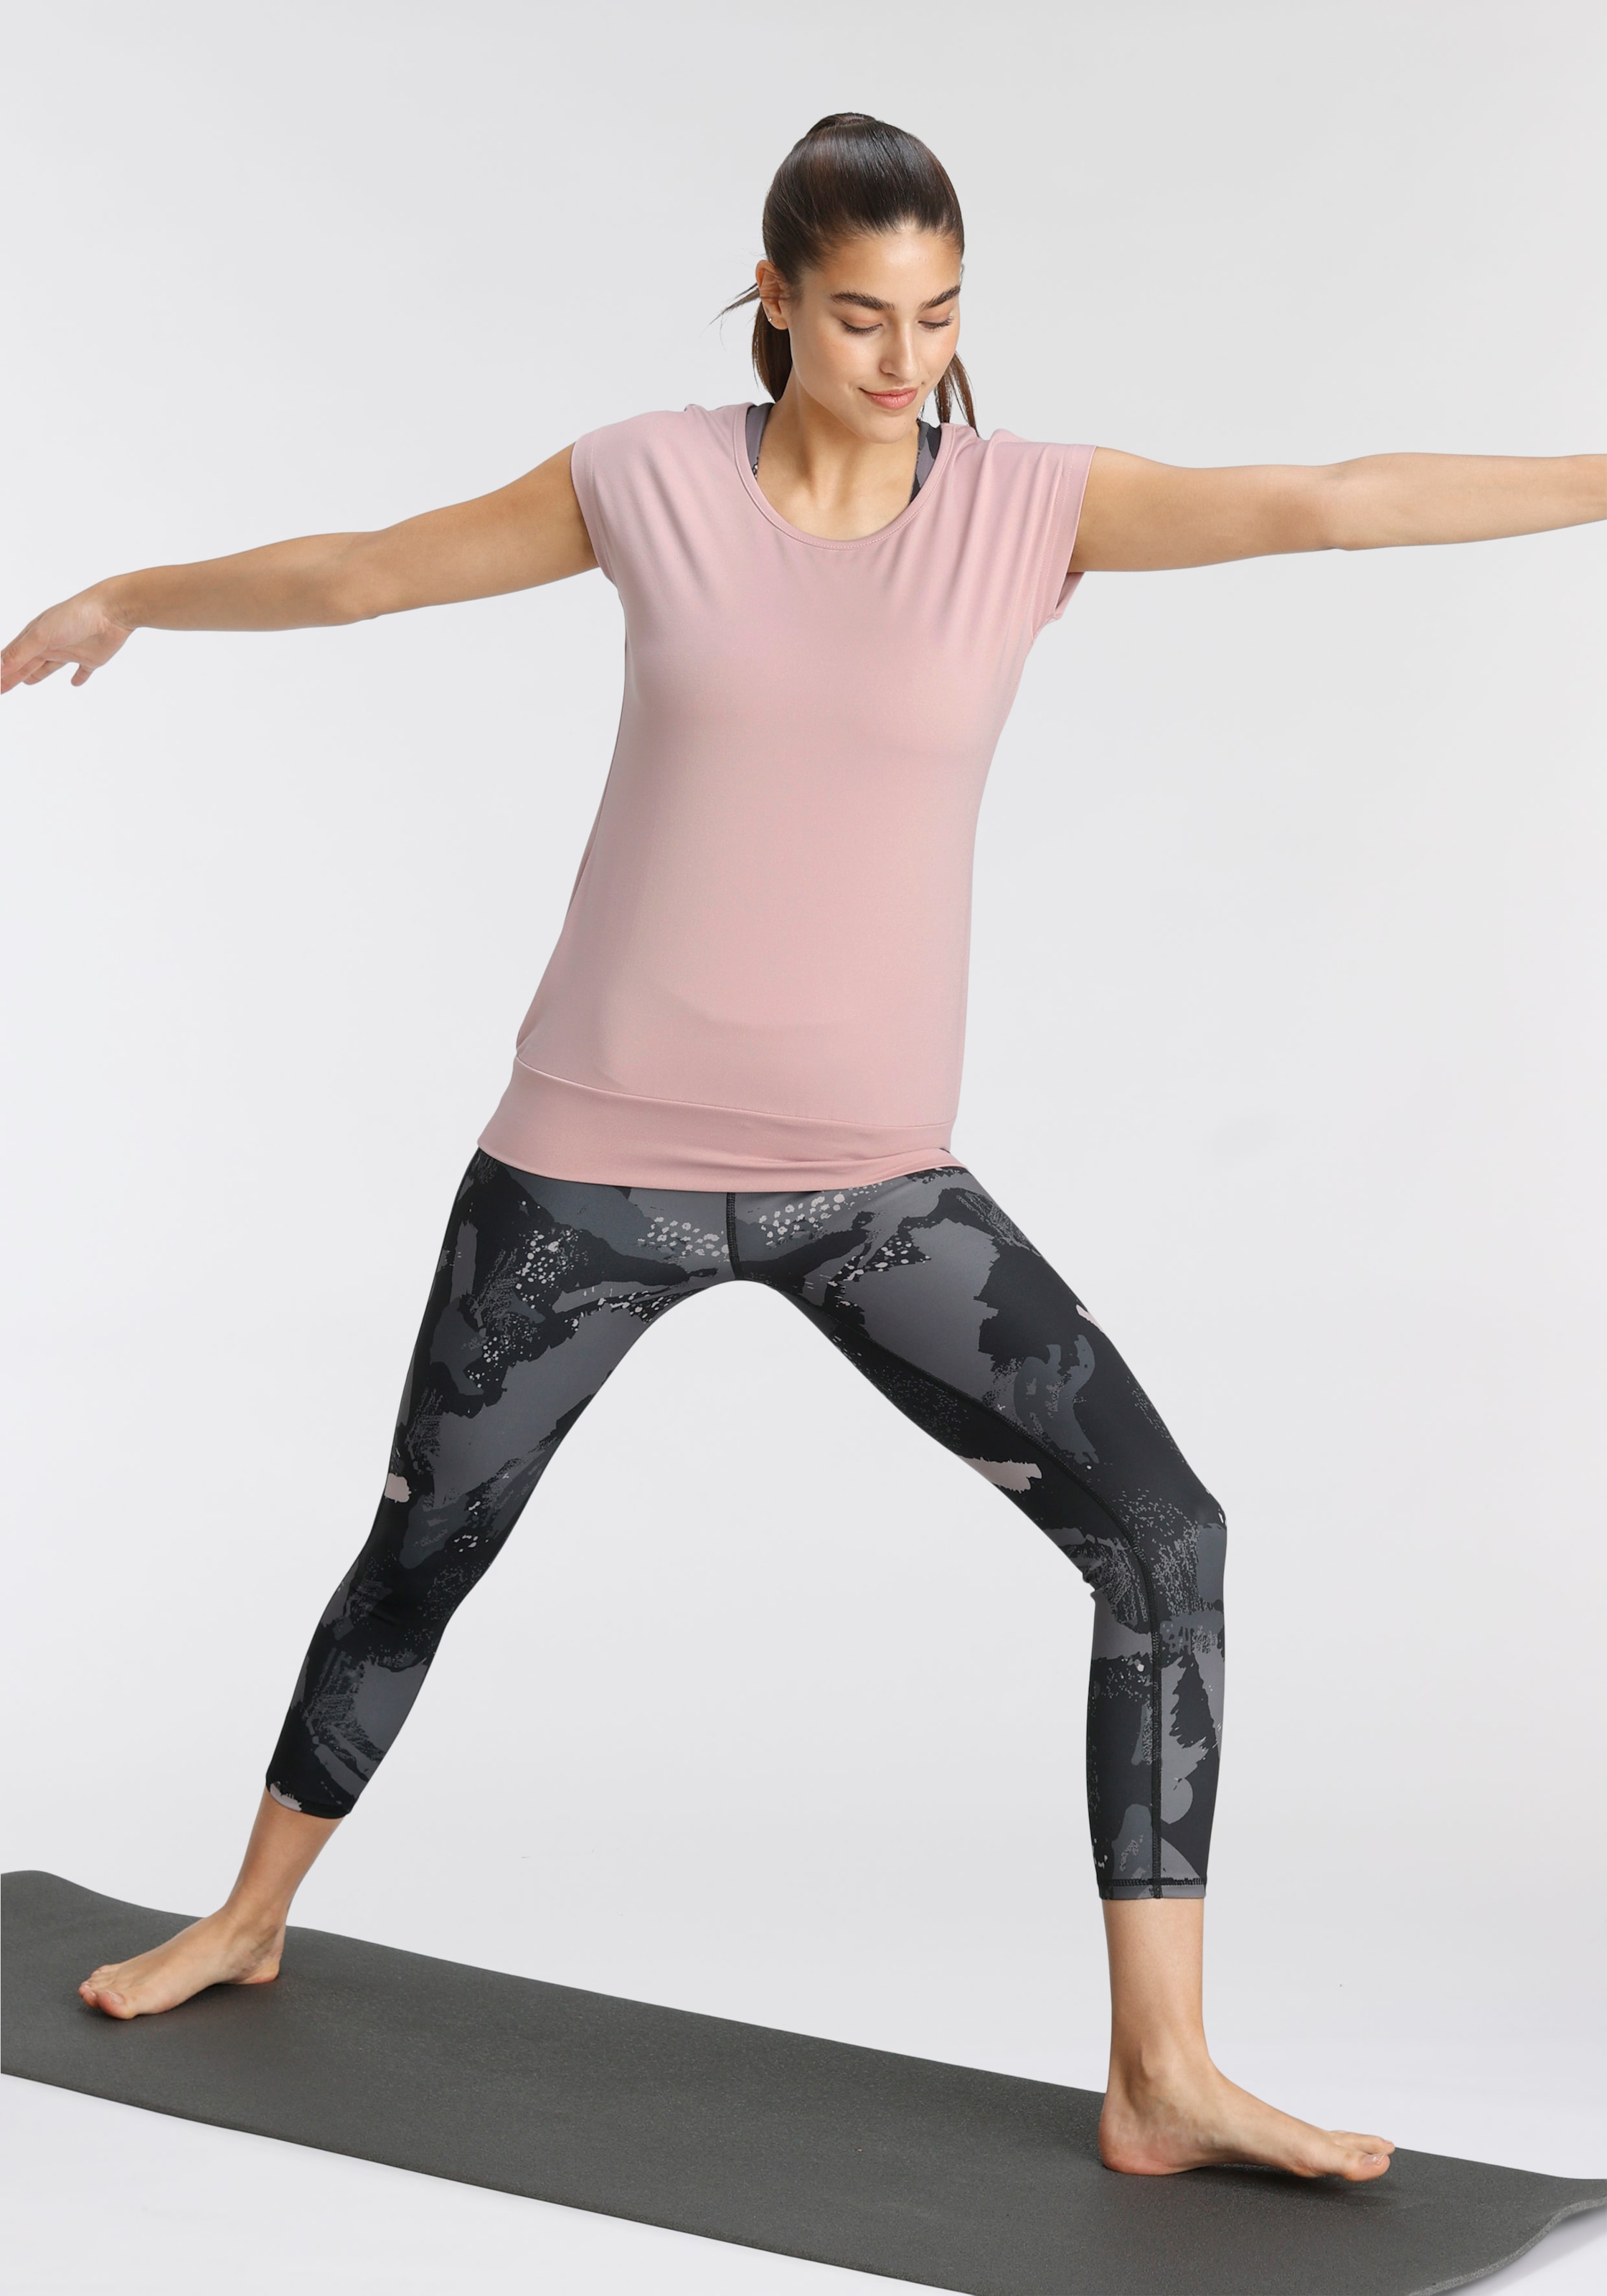 Ocean Sportswear Yoga & Relax Shirt »Soulwear - Essentials Yoga Shirts«,  (Packung, 2er-Pack) bei OTTOversand | Funktionsshirts